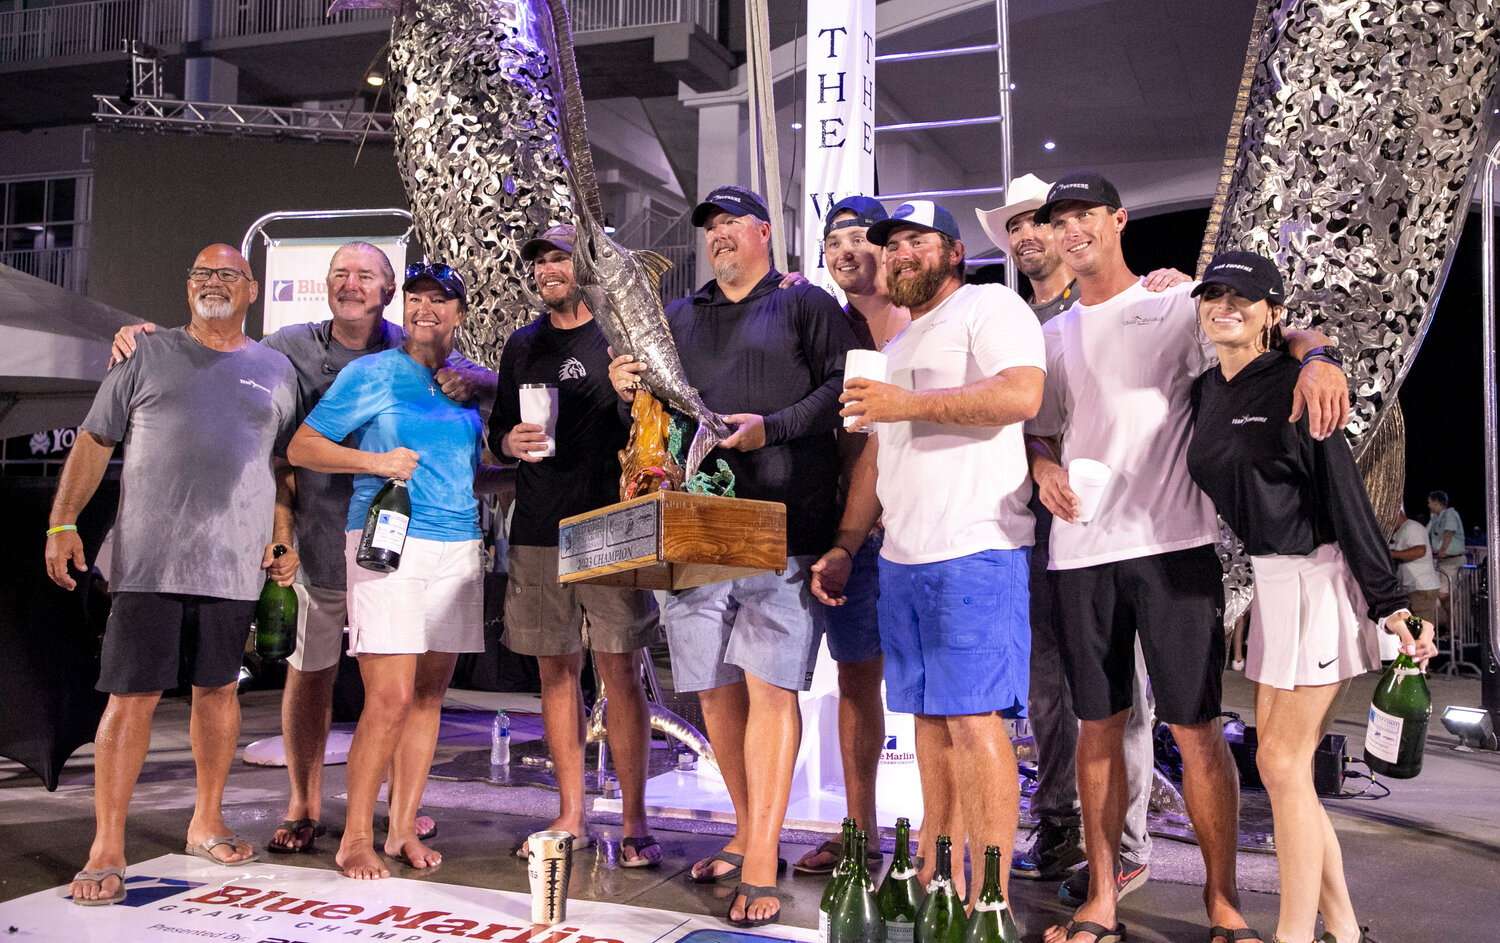 Team Supreme from Destin, Florida claimed the Gulf Coast Triple Crown trophy Saturday night at The Wharf.